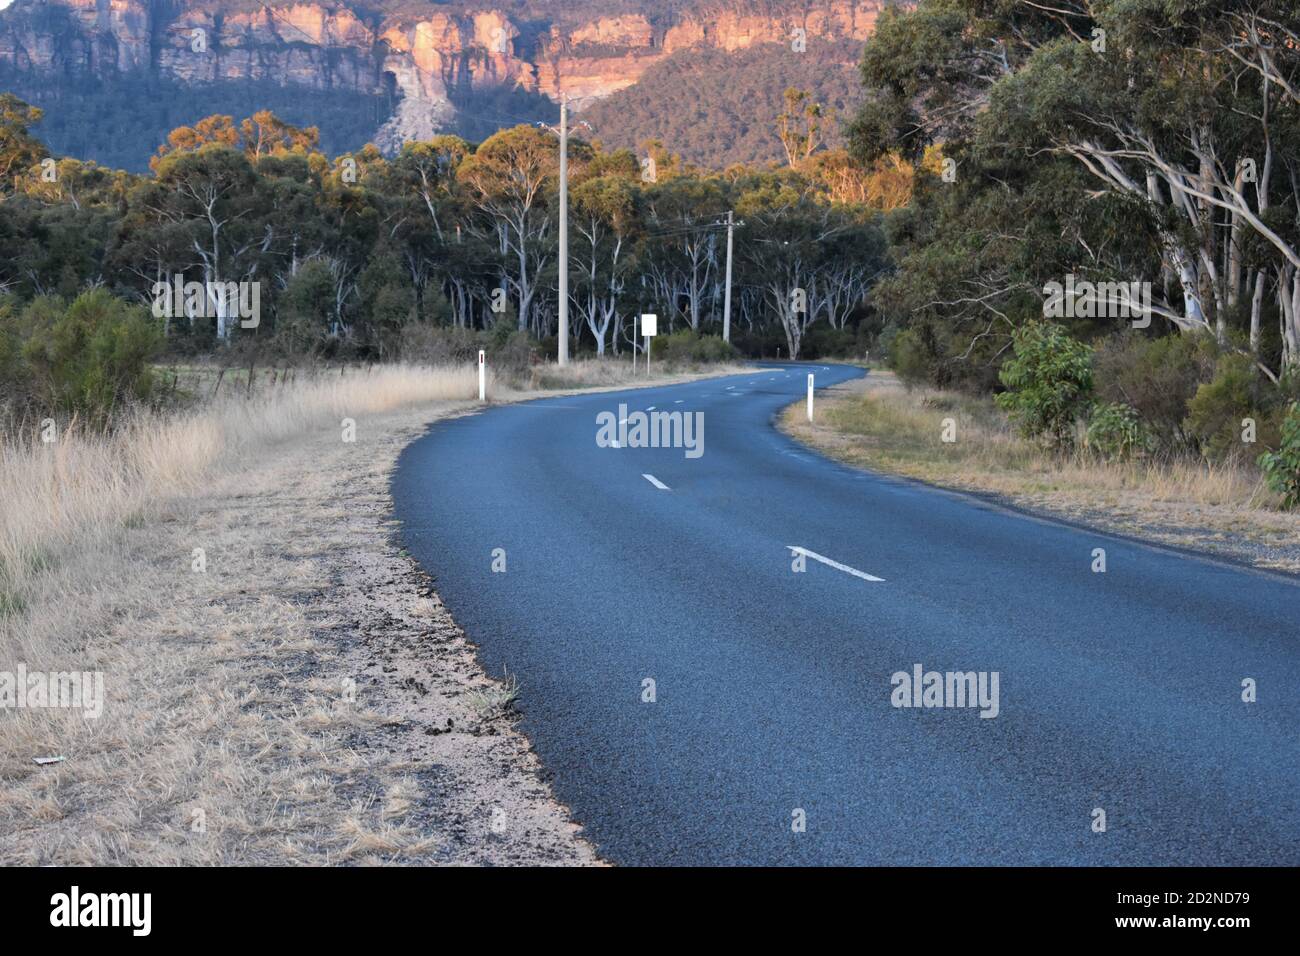 a winding road with the cliffs of the blue mountains in the background Stock Photo